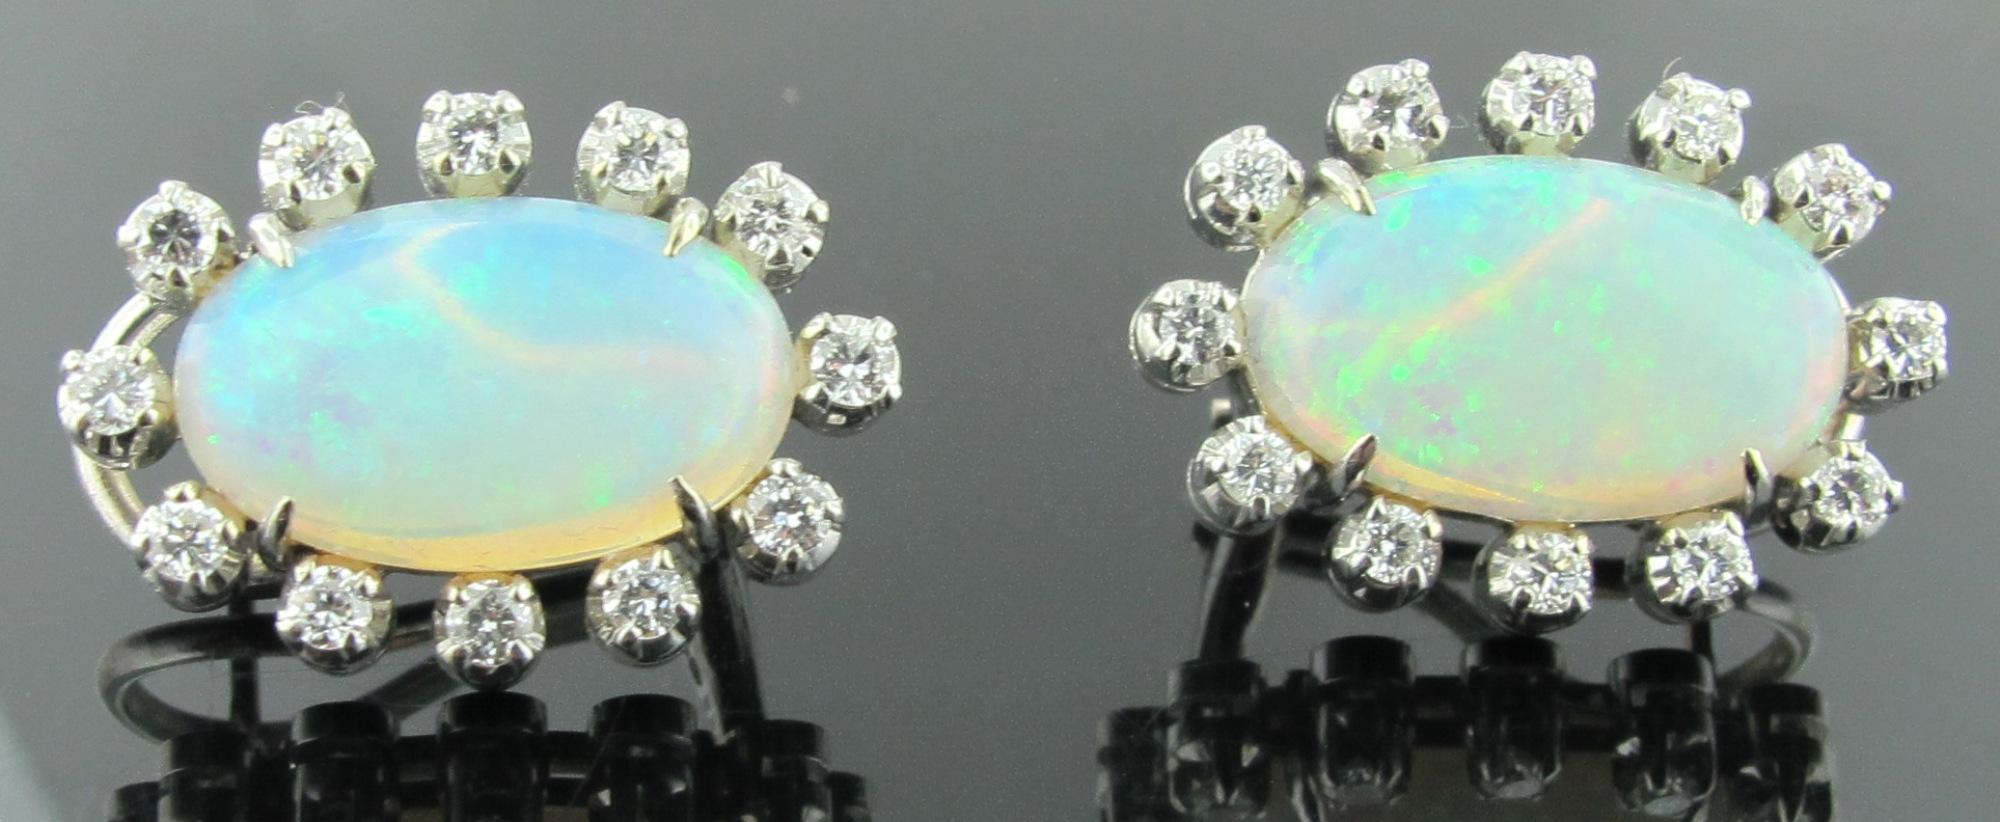 Round Cut Opal Earrings Set in 14 Karat White Gold Surrounded with Diamonds